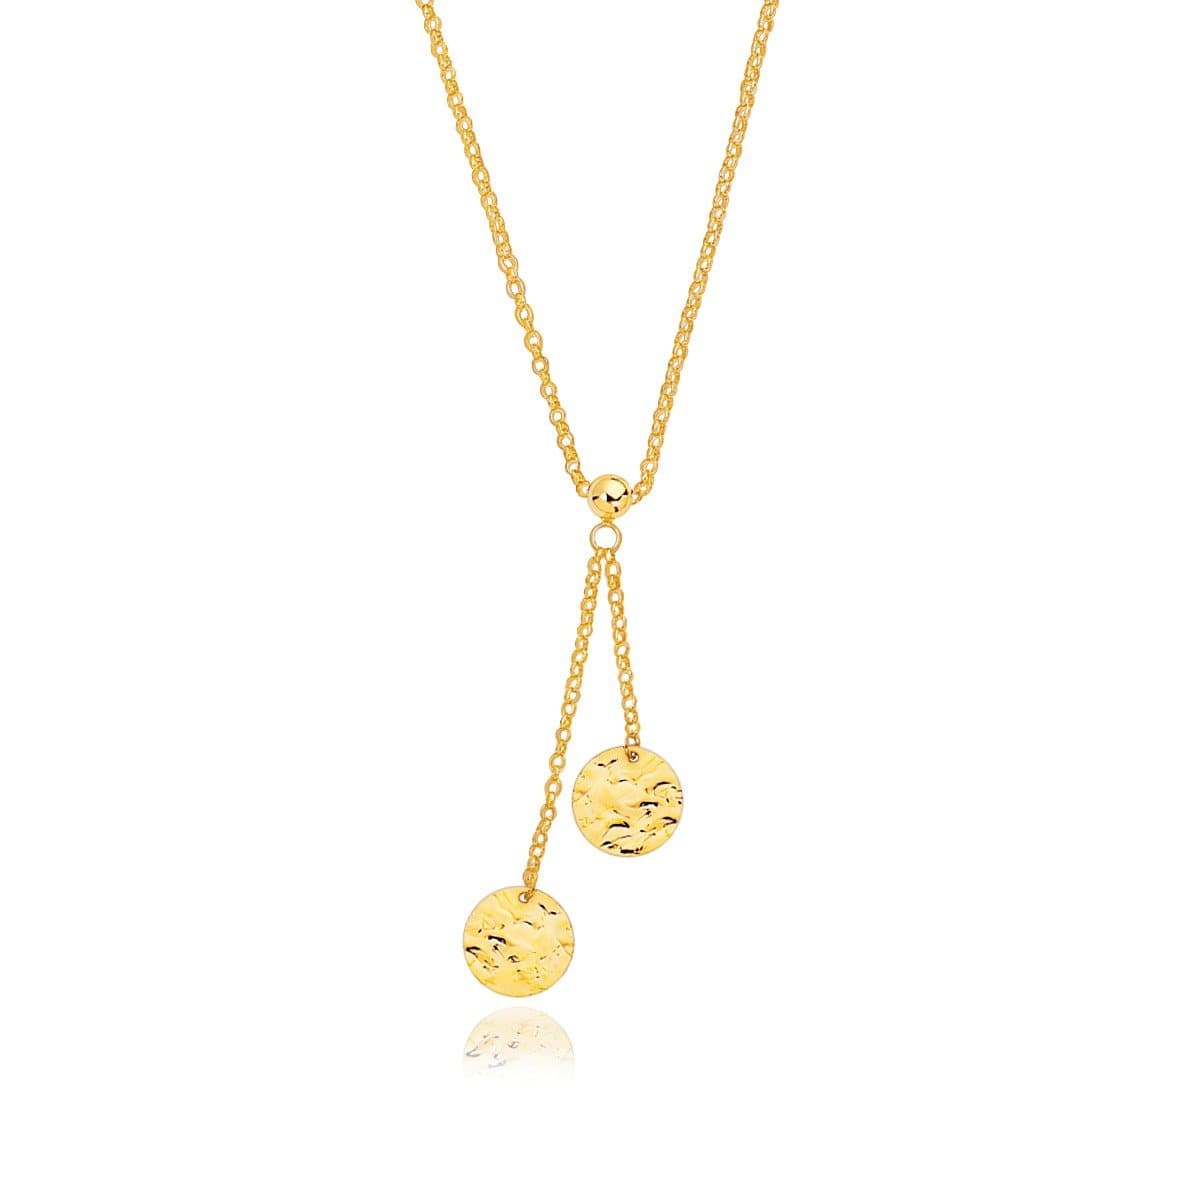 14k Yellow Gold Hammered Disc Lariat 17" Necklace